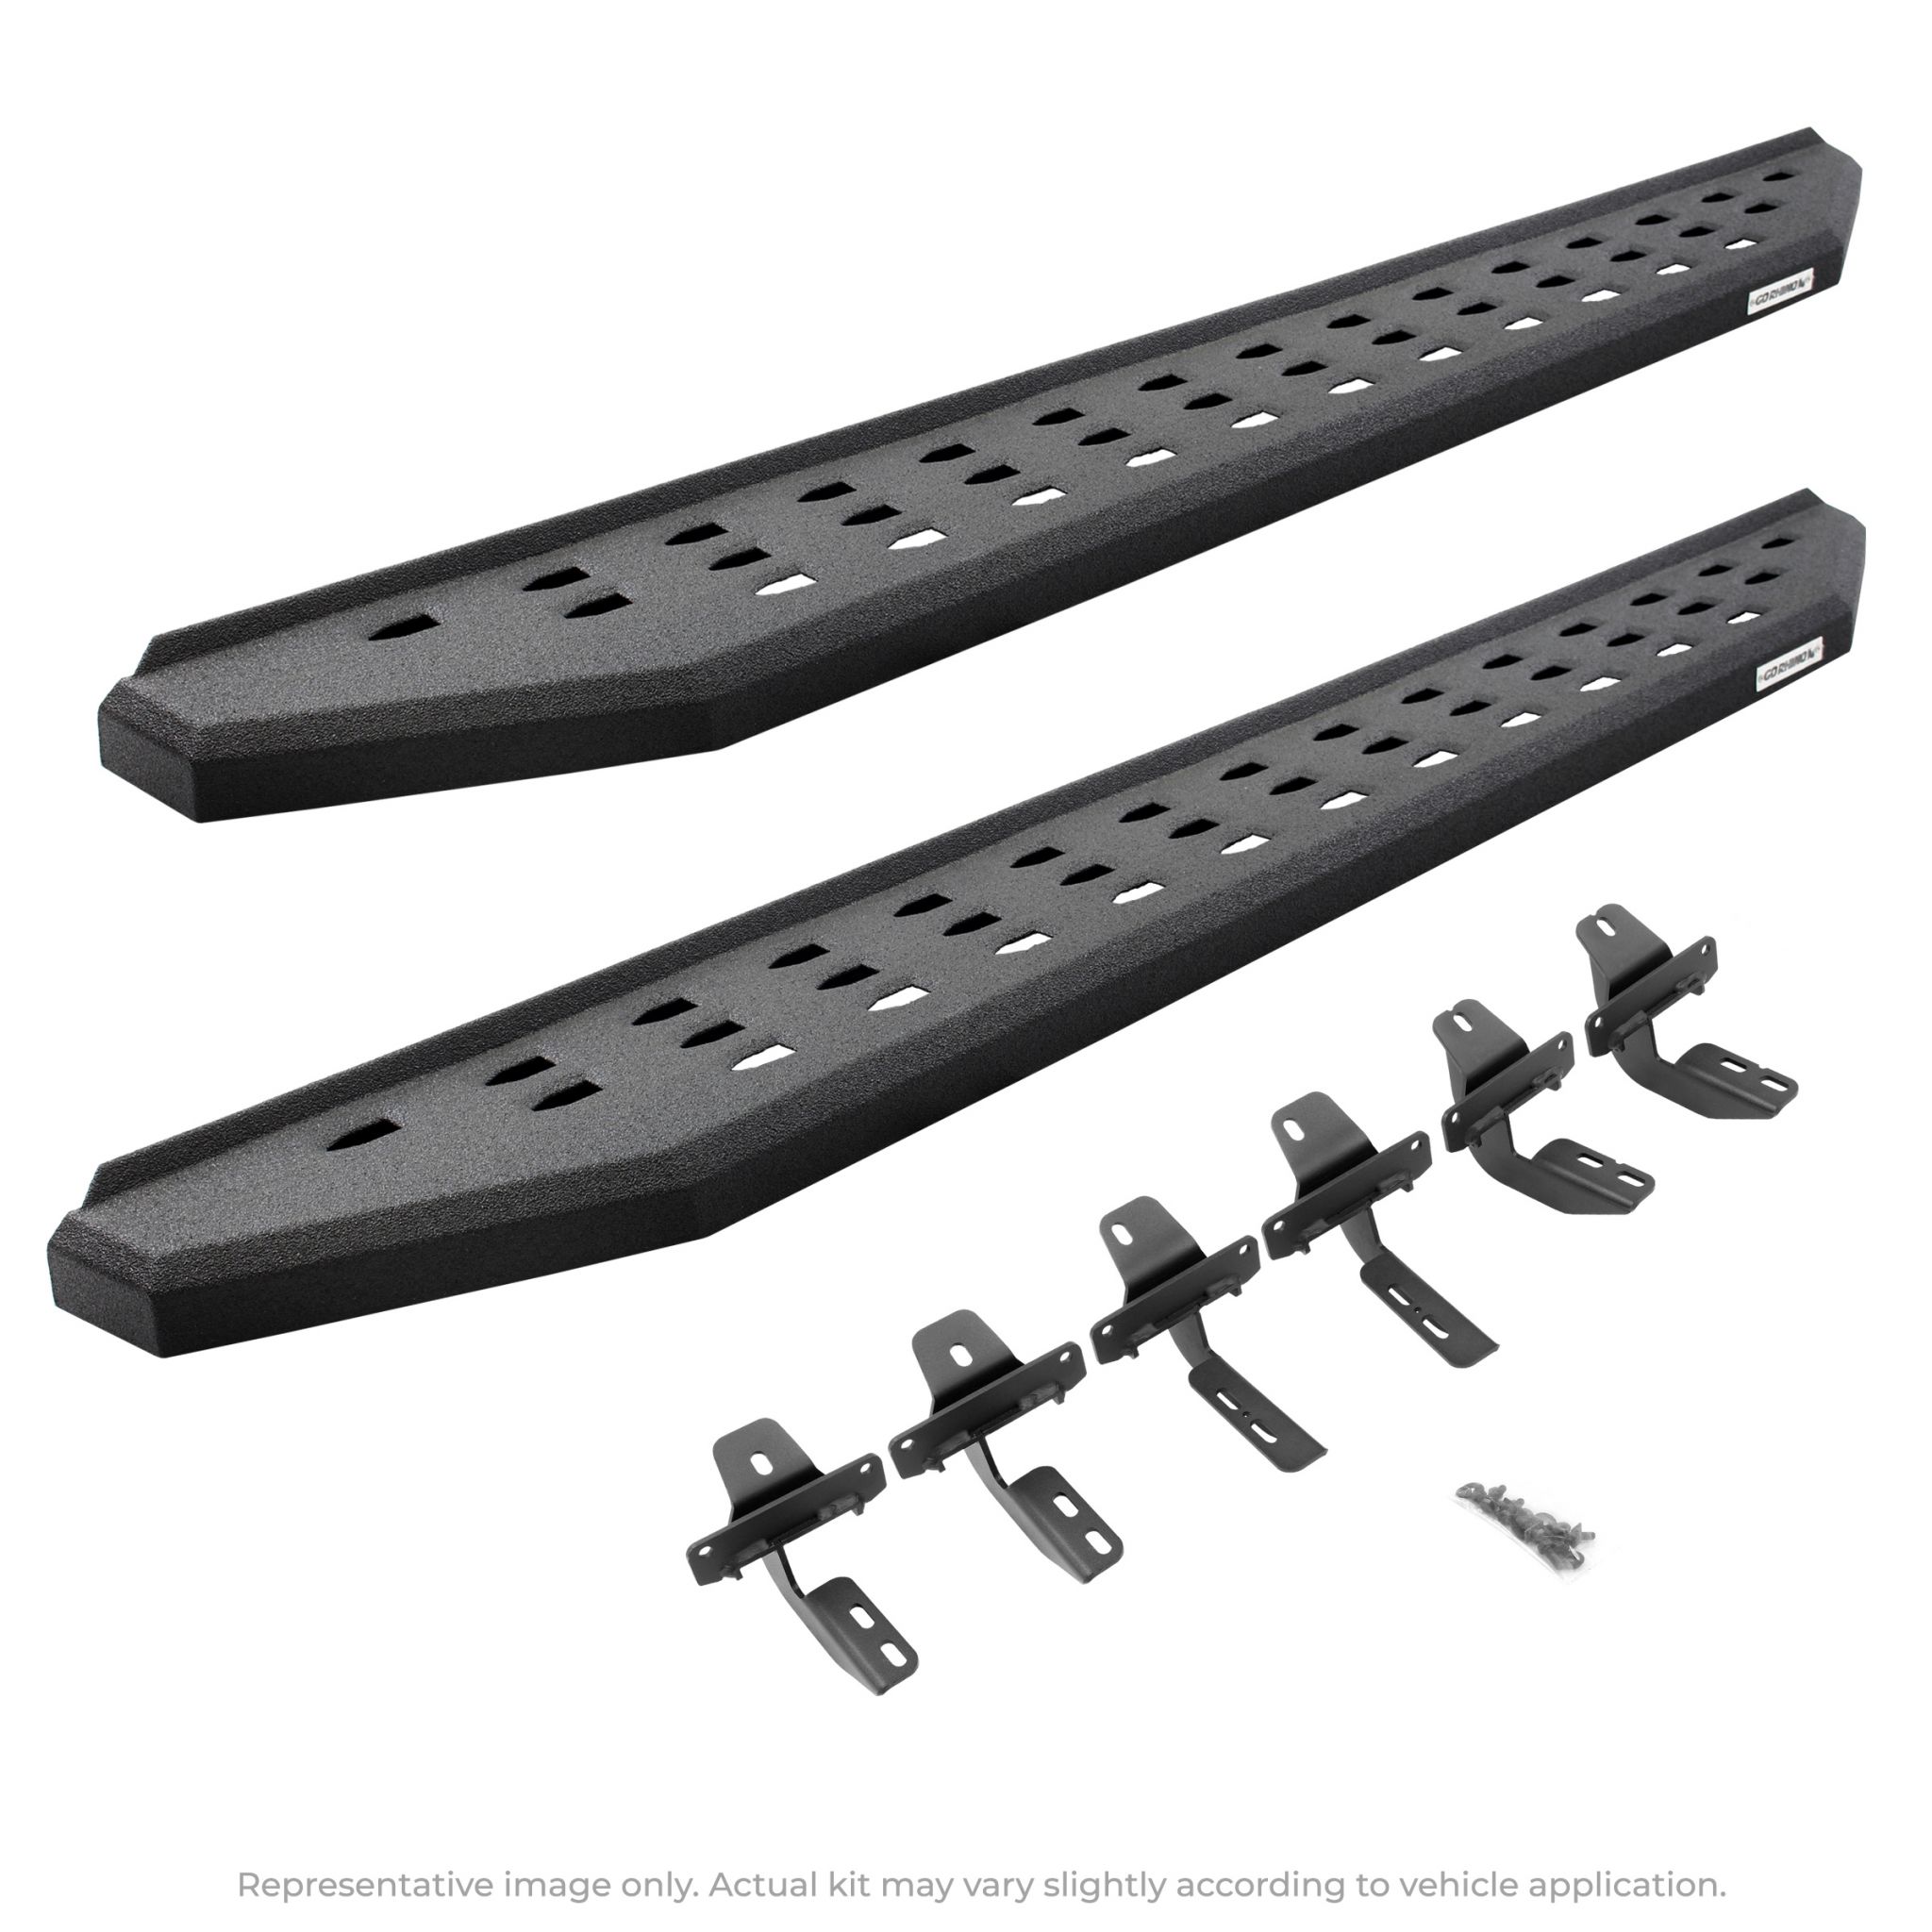 Go Rhino - 69492748T - RB20 Running Boards With Mounting Brackets - Protective Bedliner Coating